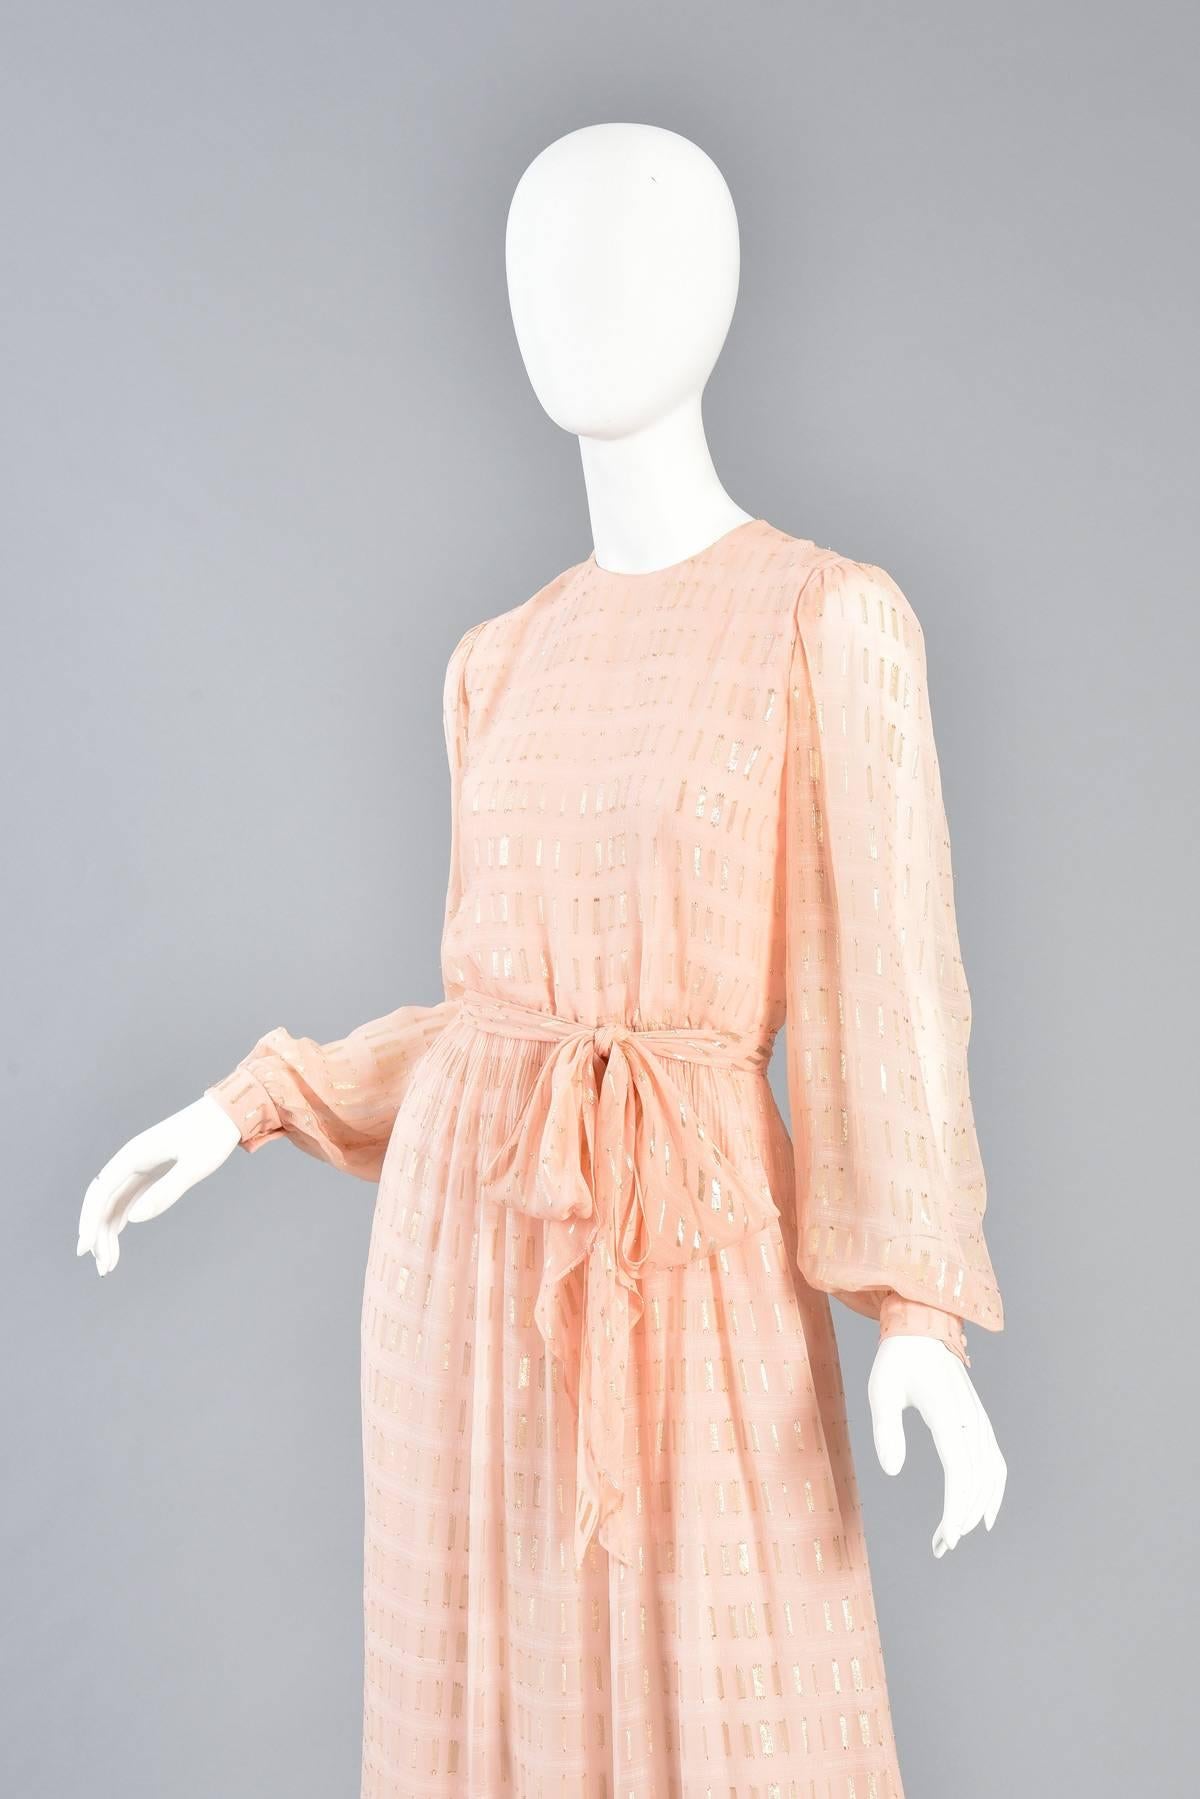 1960s Nat Kaplan Couture Peach Silk Dress with Gold Lurex Threads Throughout For Sale 1